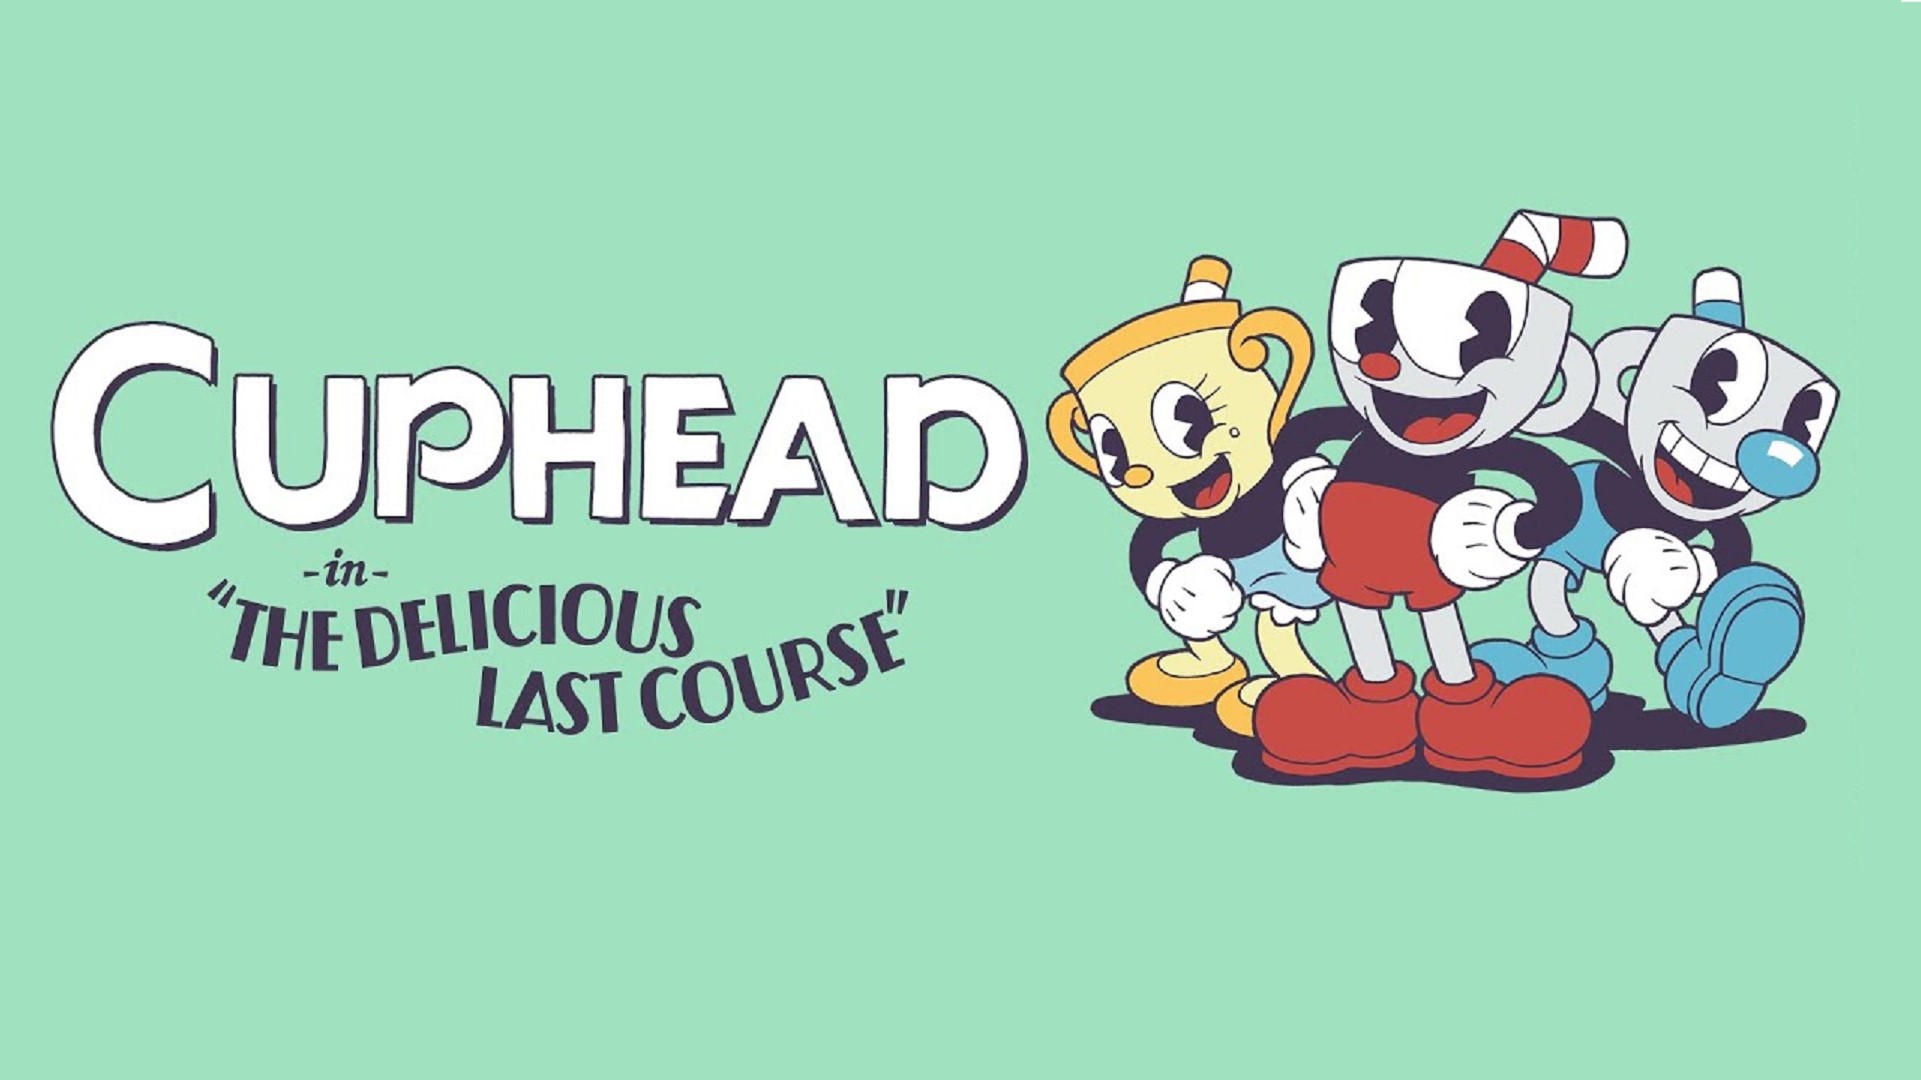 Ms. Chalice Showing Her Ghost Abilities Scene - The Cuphead Show